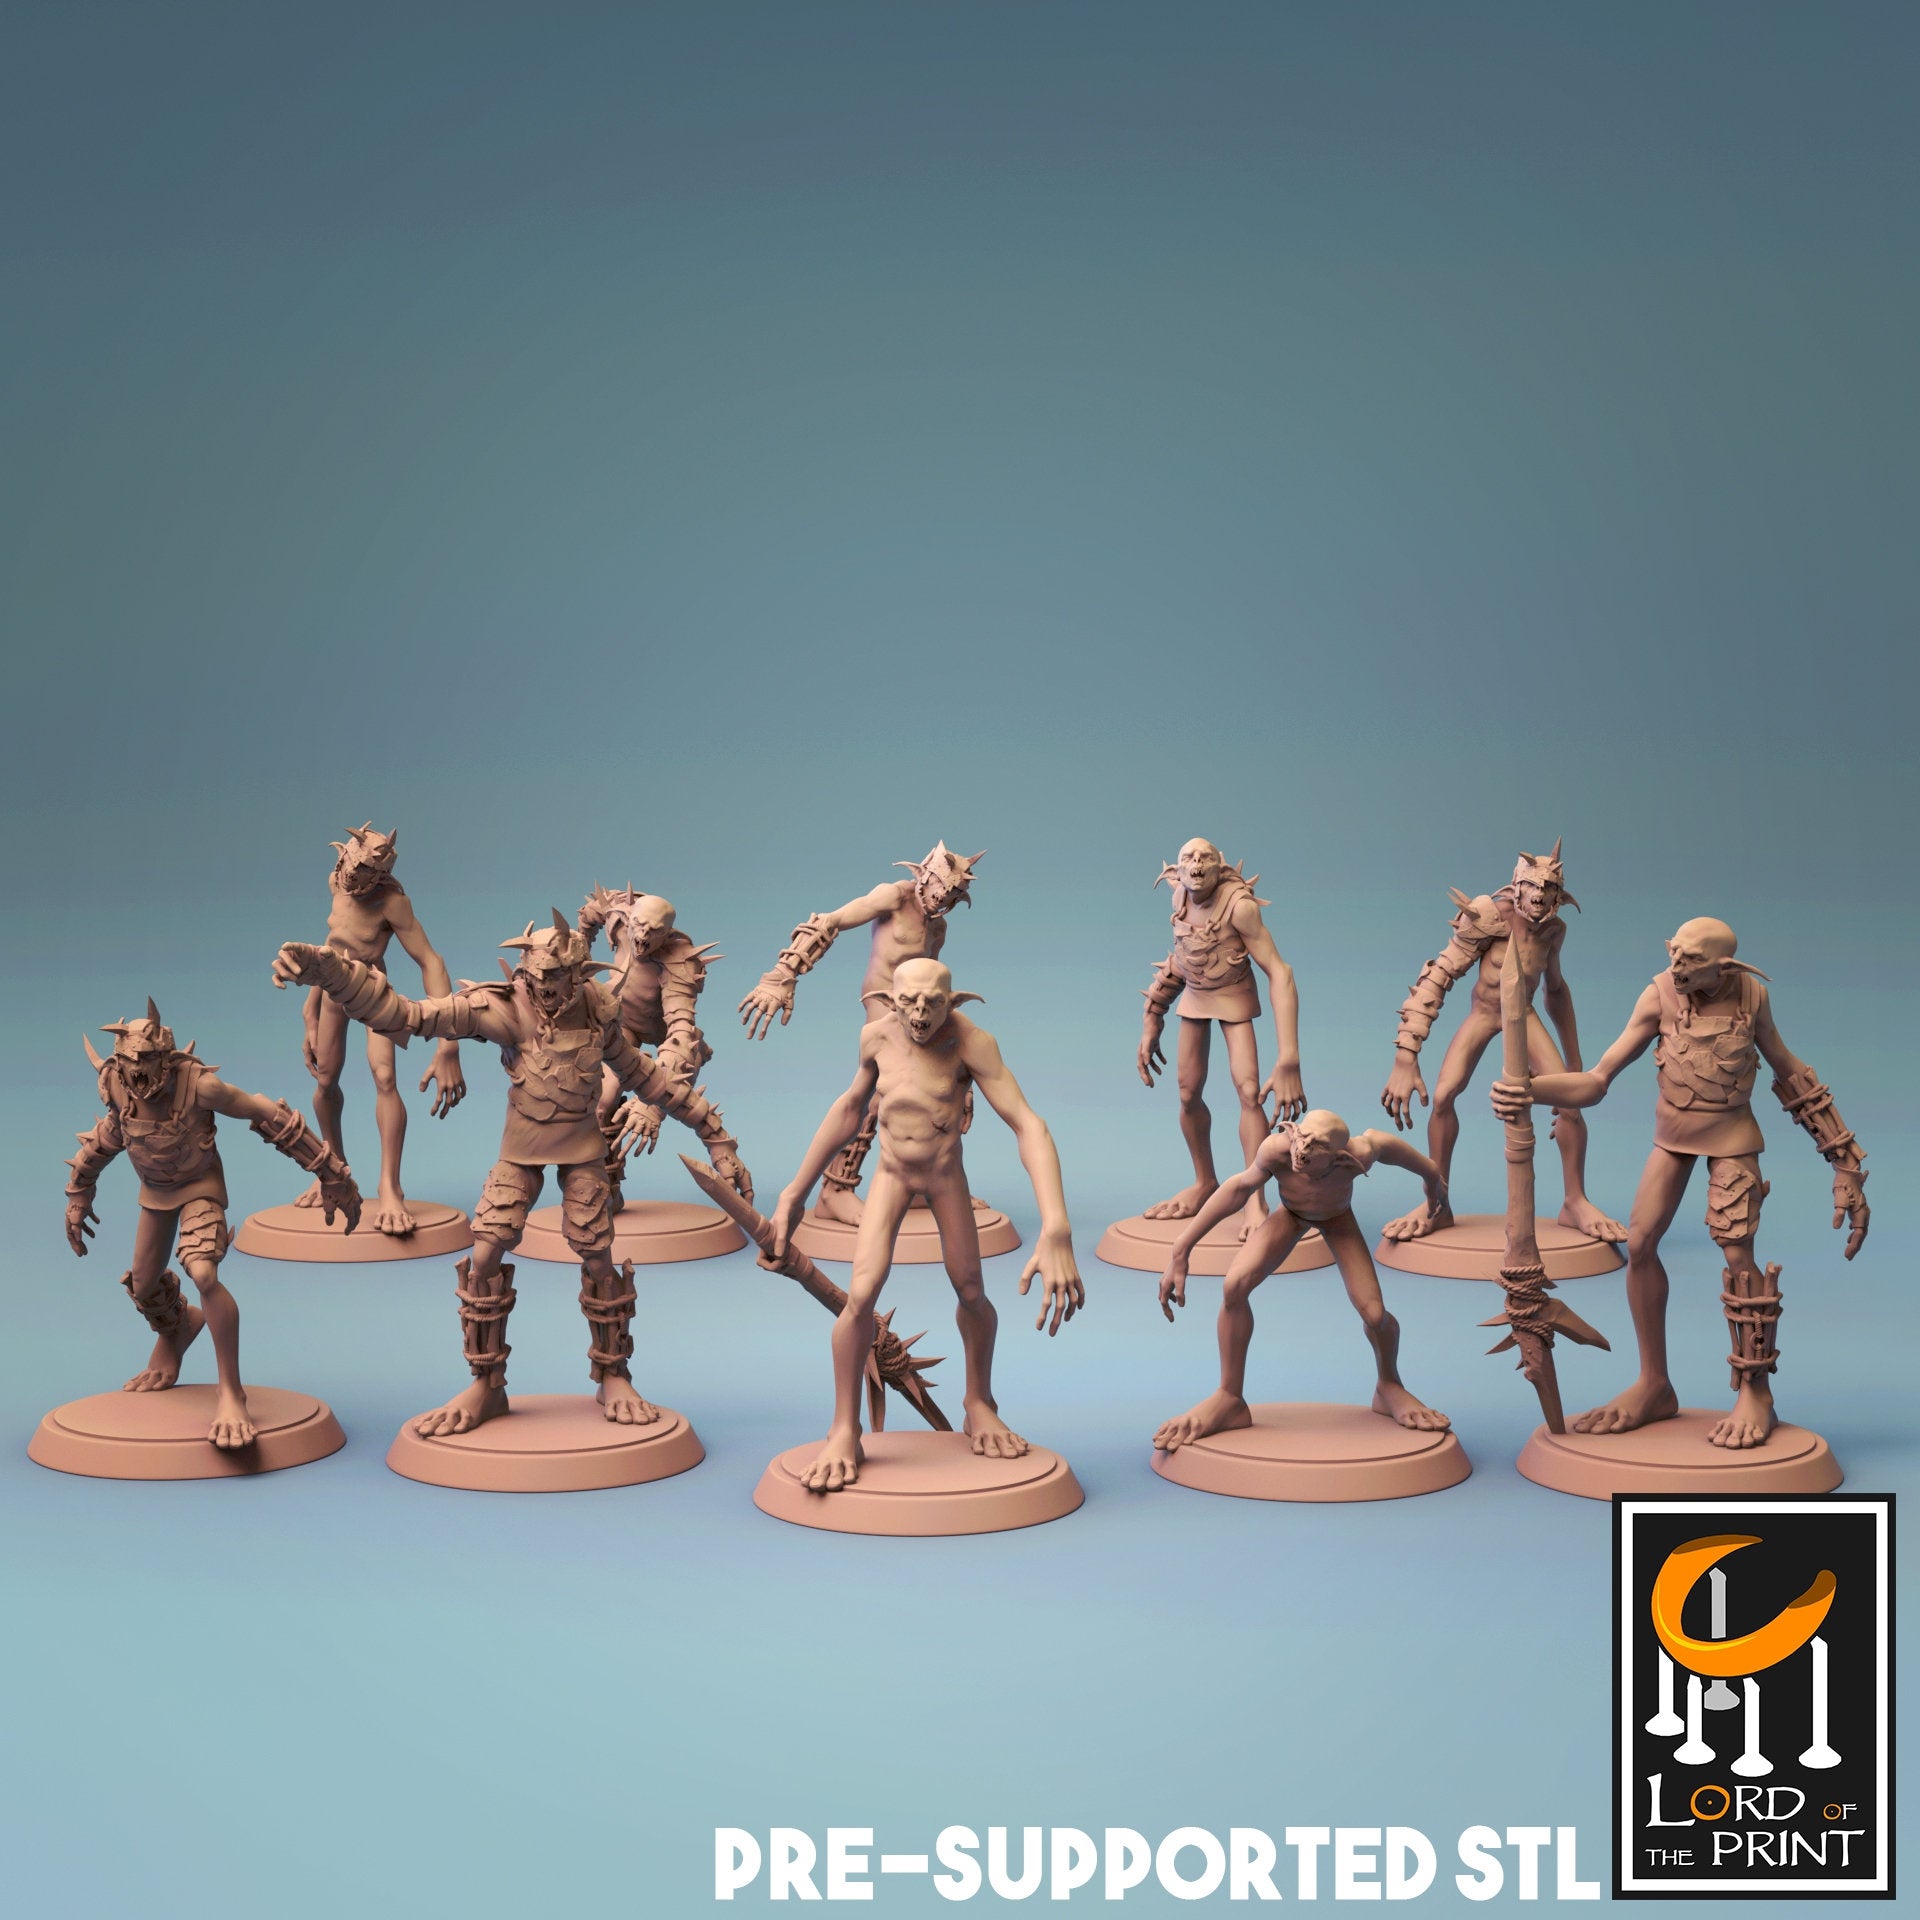 Goblin Army Bundle - 10 Lord of the Print Miniatures | Dungeons & Dragons | Pathfinder | Tabletop